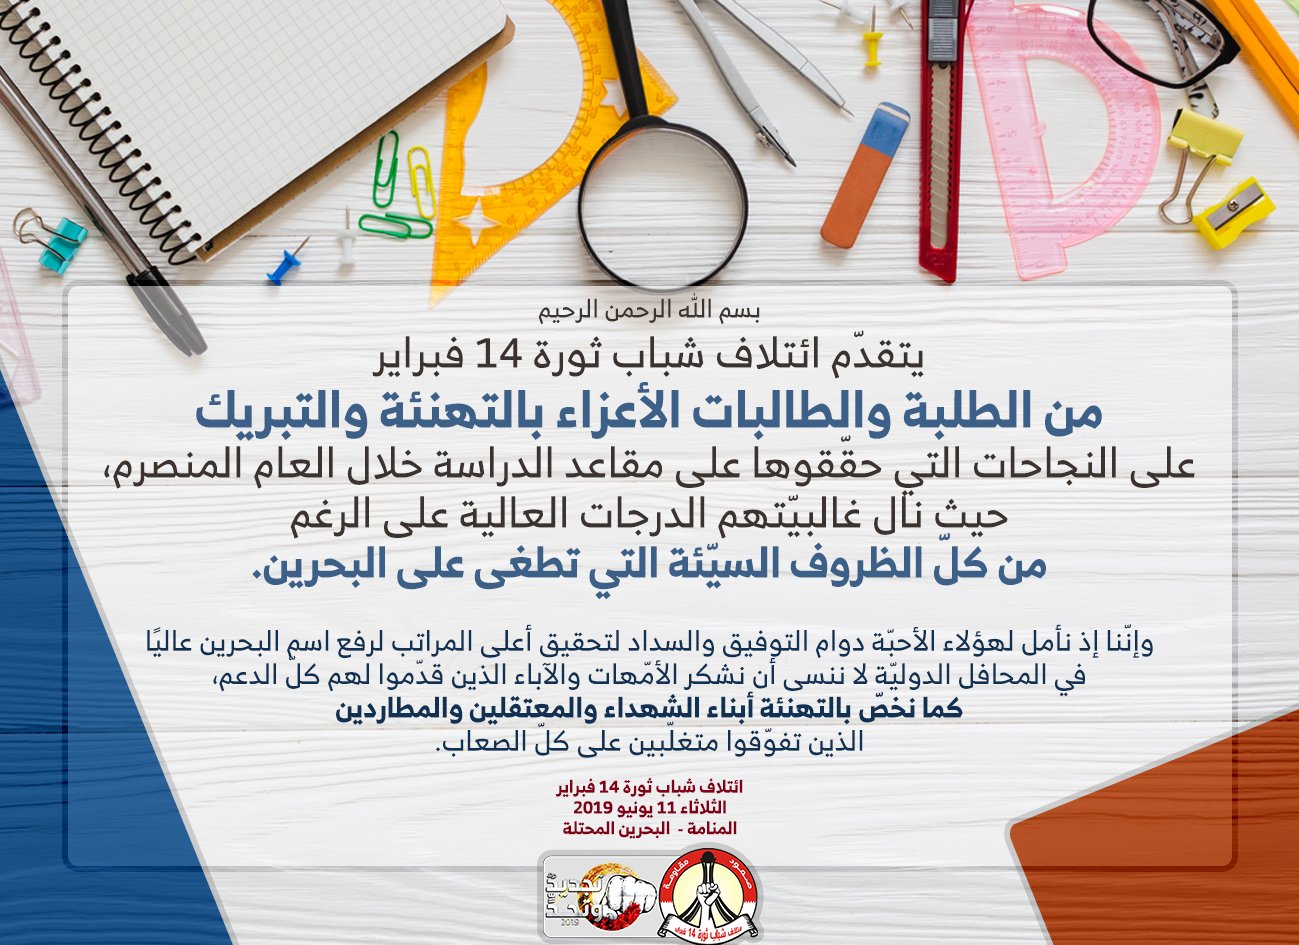 February 14th Coalition congratulates students for their success in the past academic year